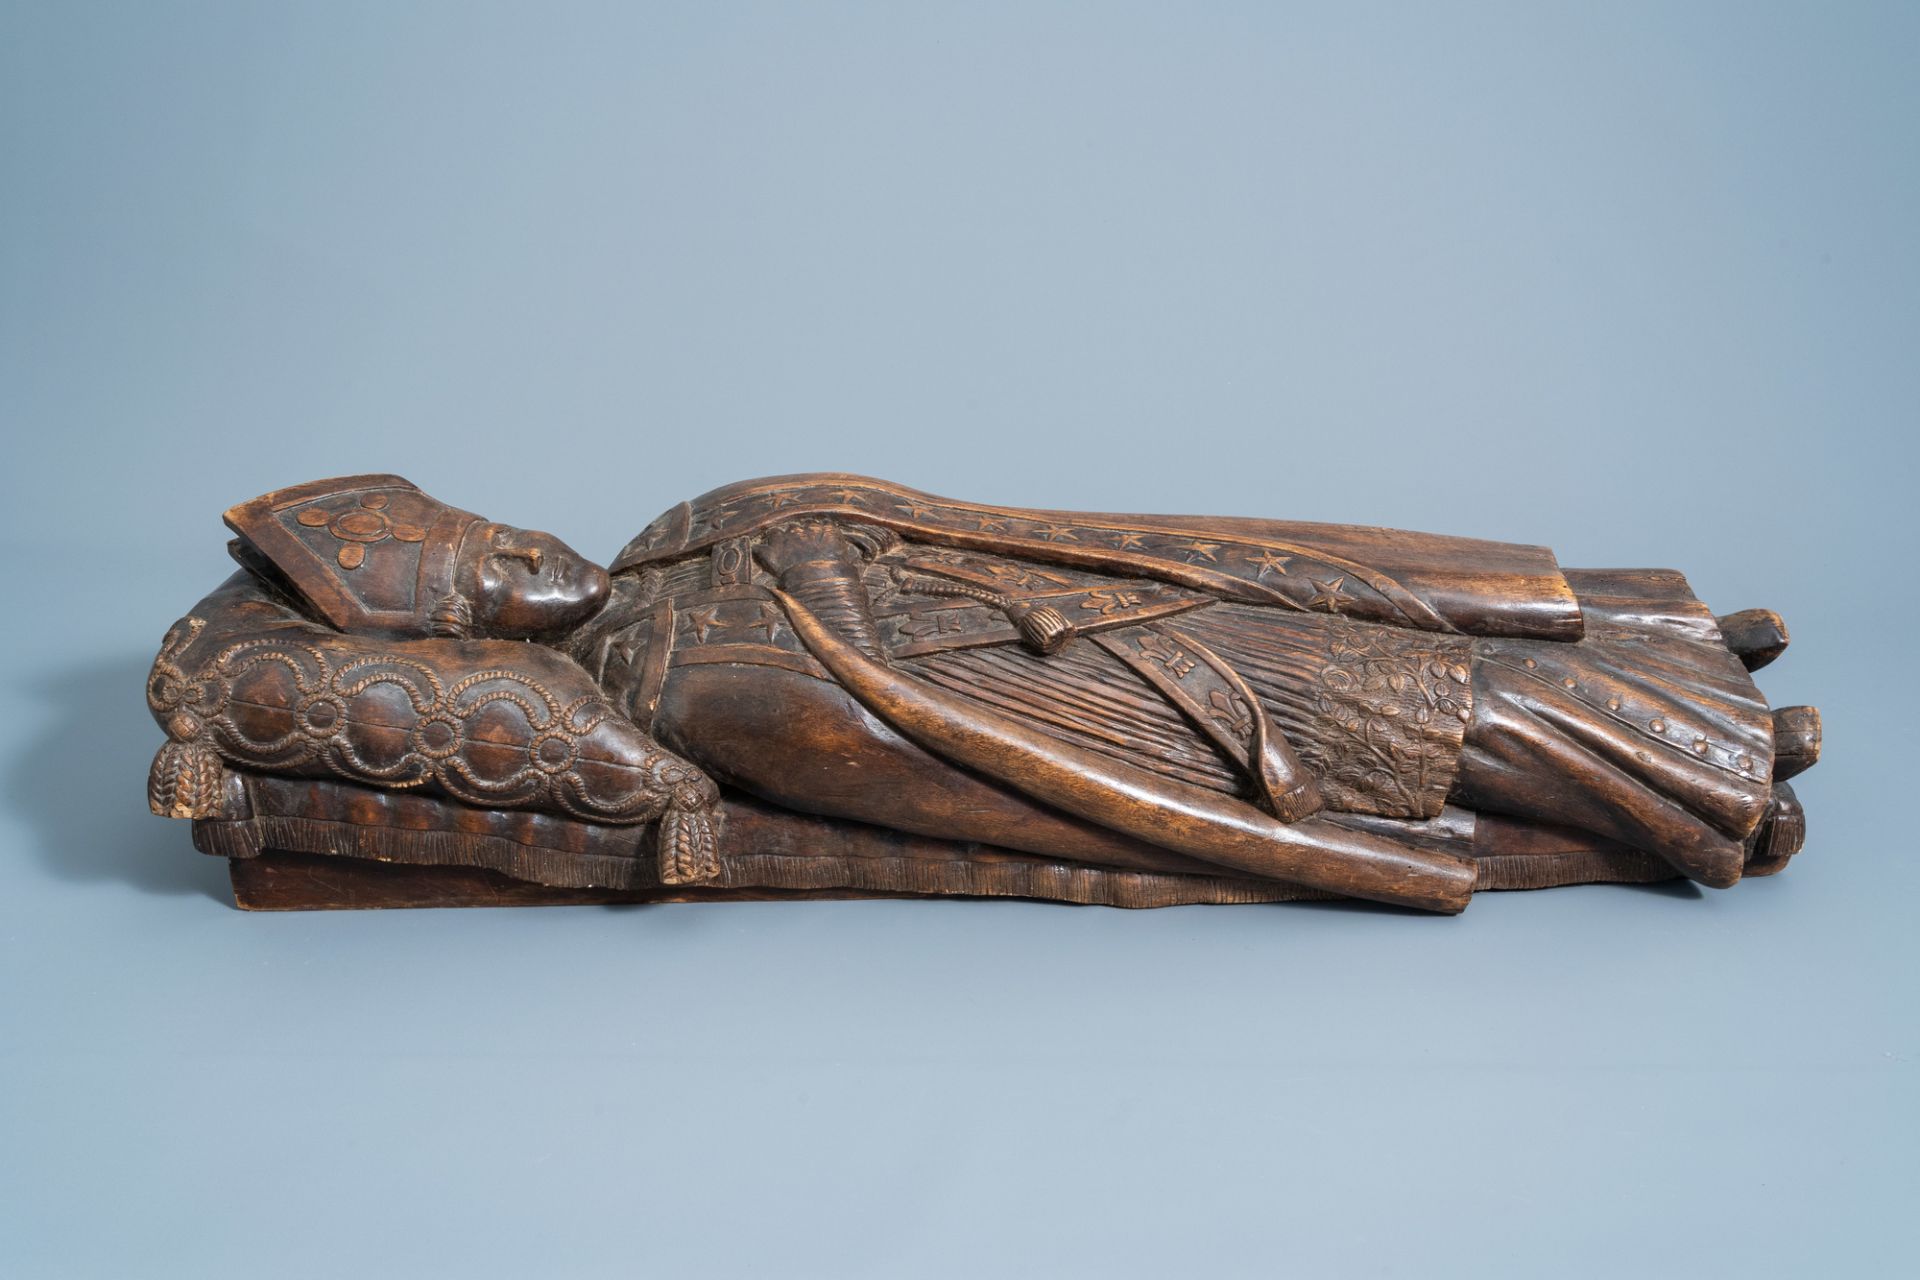 A French or Flemish carved wooden figure of a bishop on his deathbed, most probably Saint Bavo of Gh